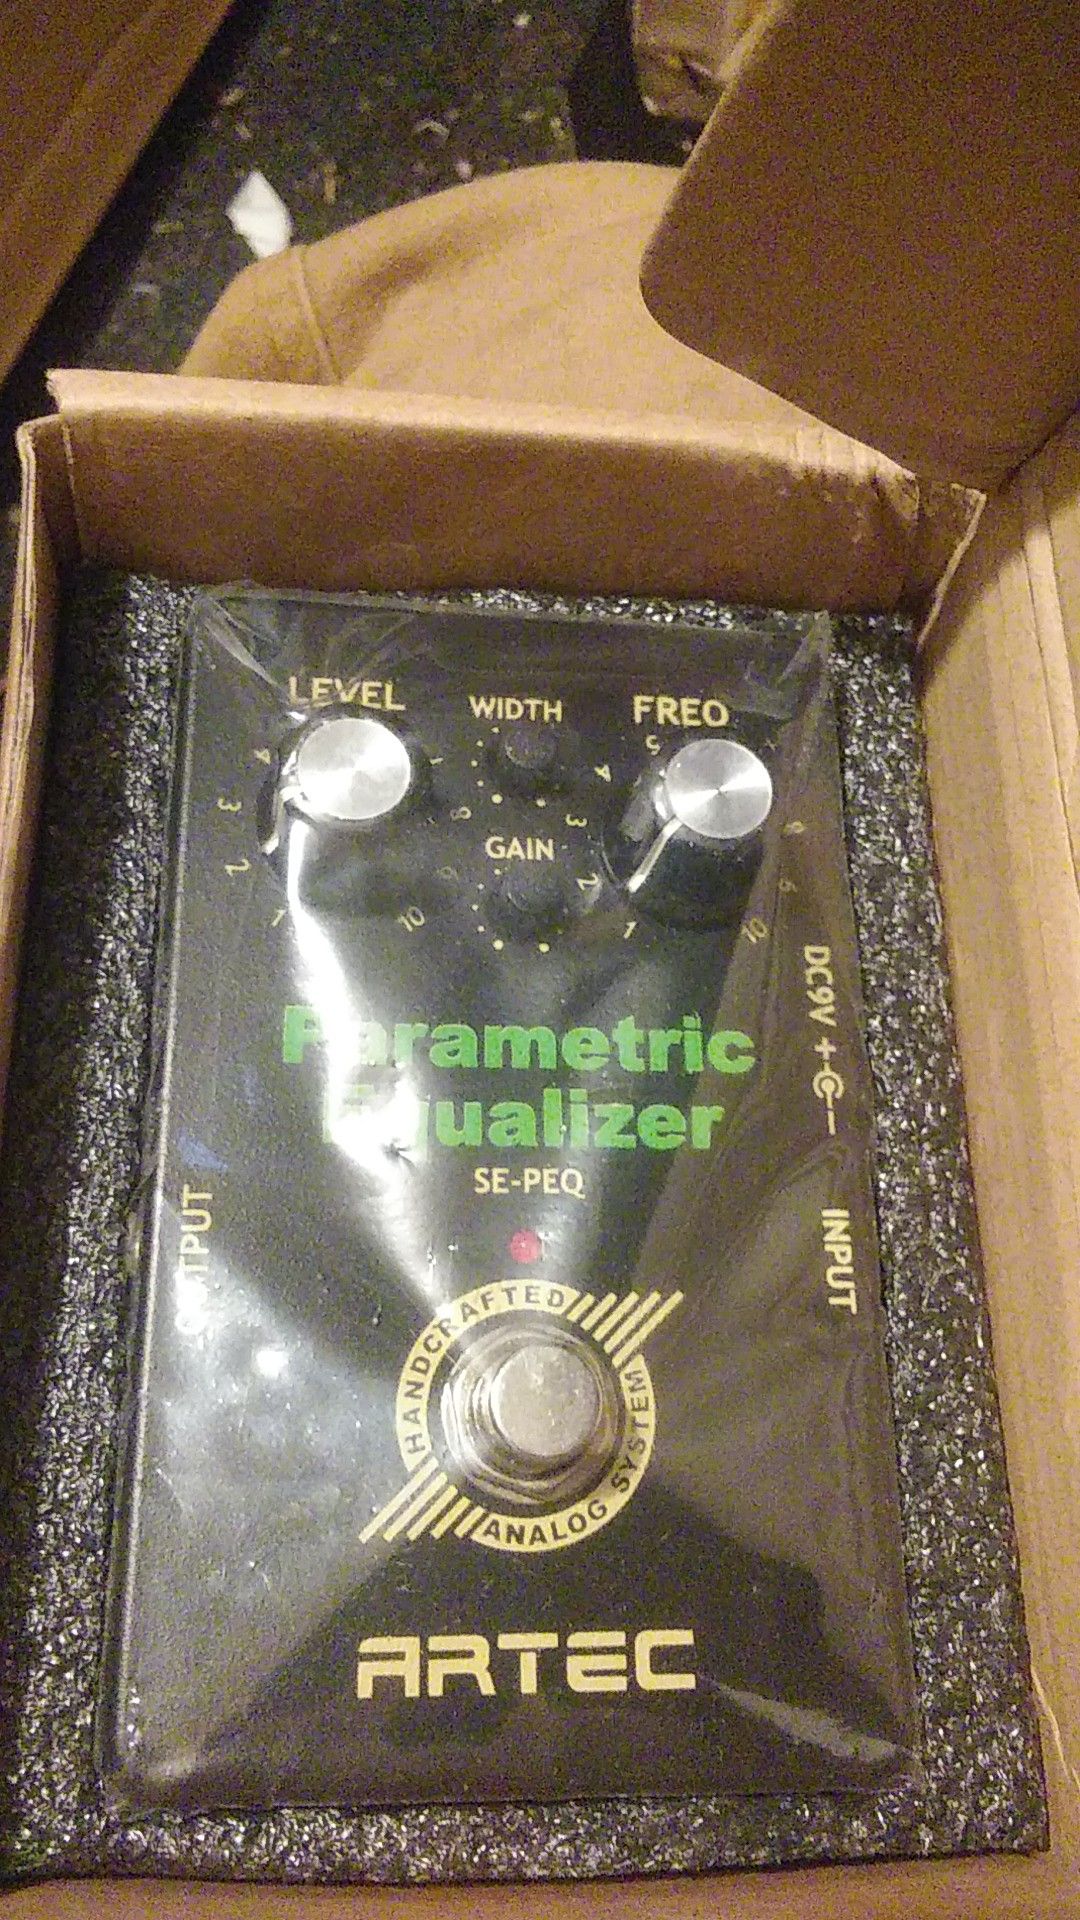 [FX PEDALS] ARTEC PARAMETRIC EQUALIZER! BRAND NEW! OPERATES IN MID Q FIELDS, PERFECT FOR GUITAR!